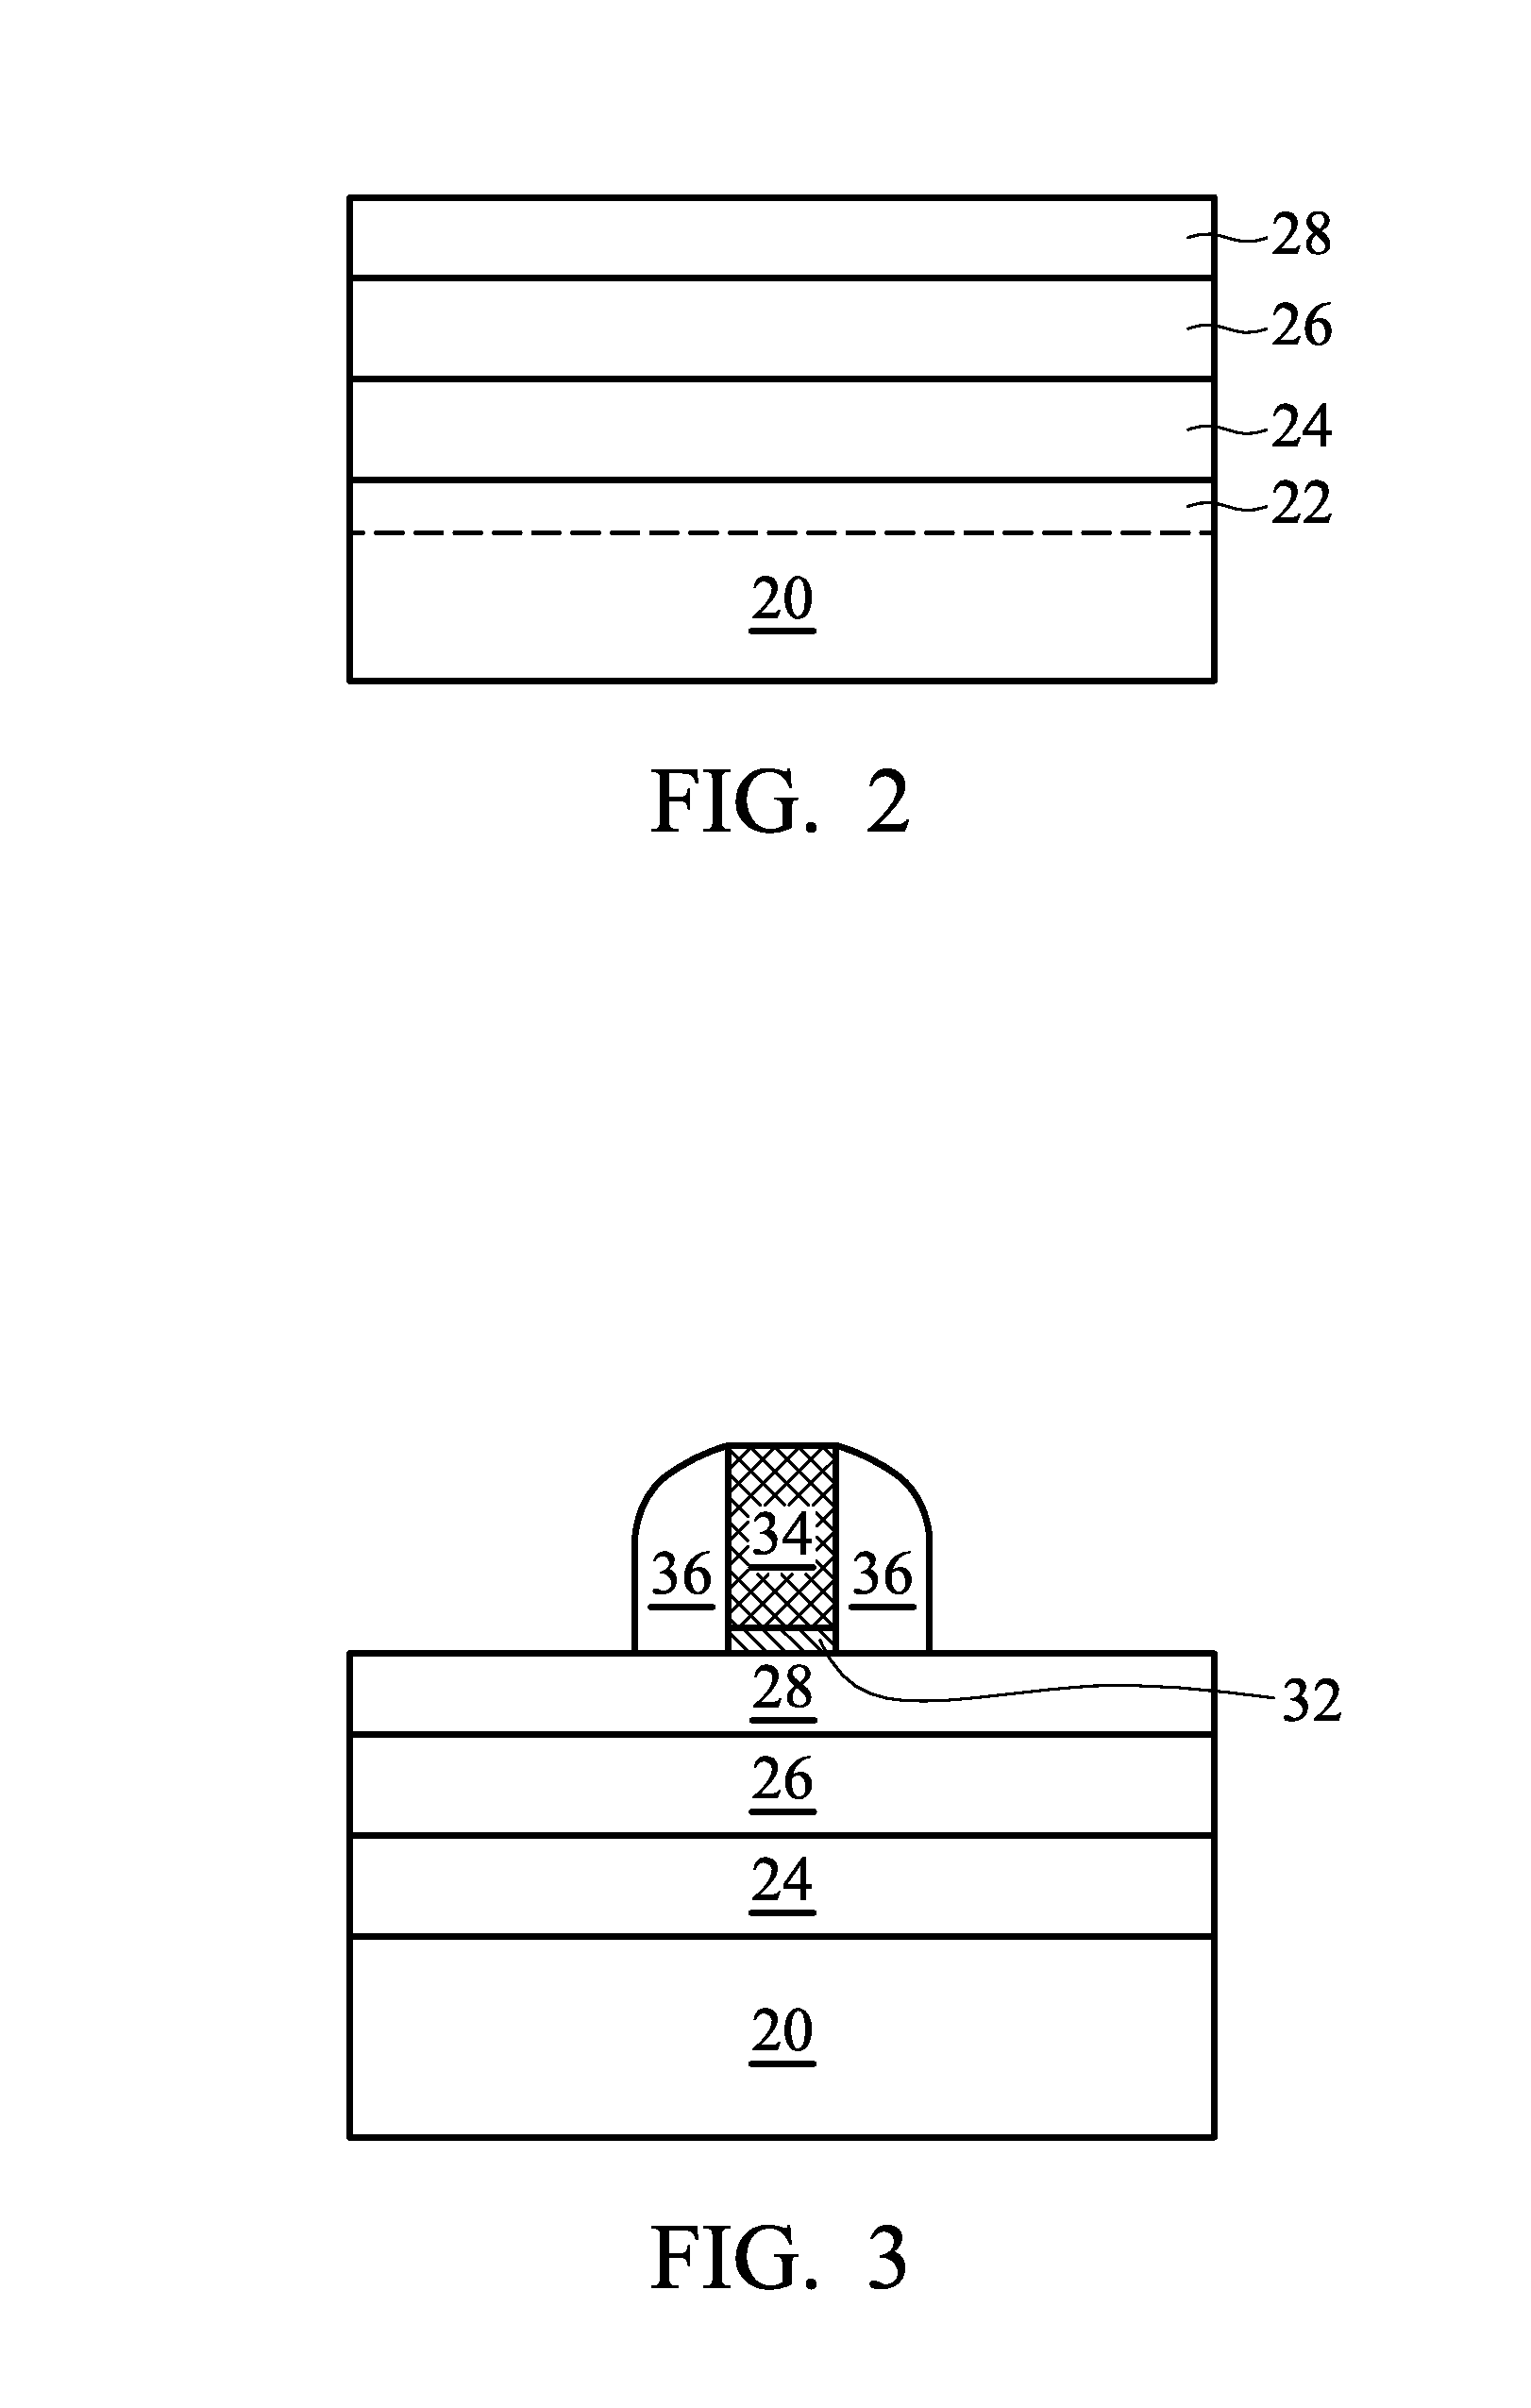 Source/Drain Re-Growth for Manufacturing III-V Based Transistors